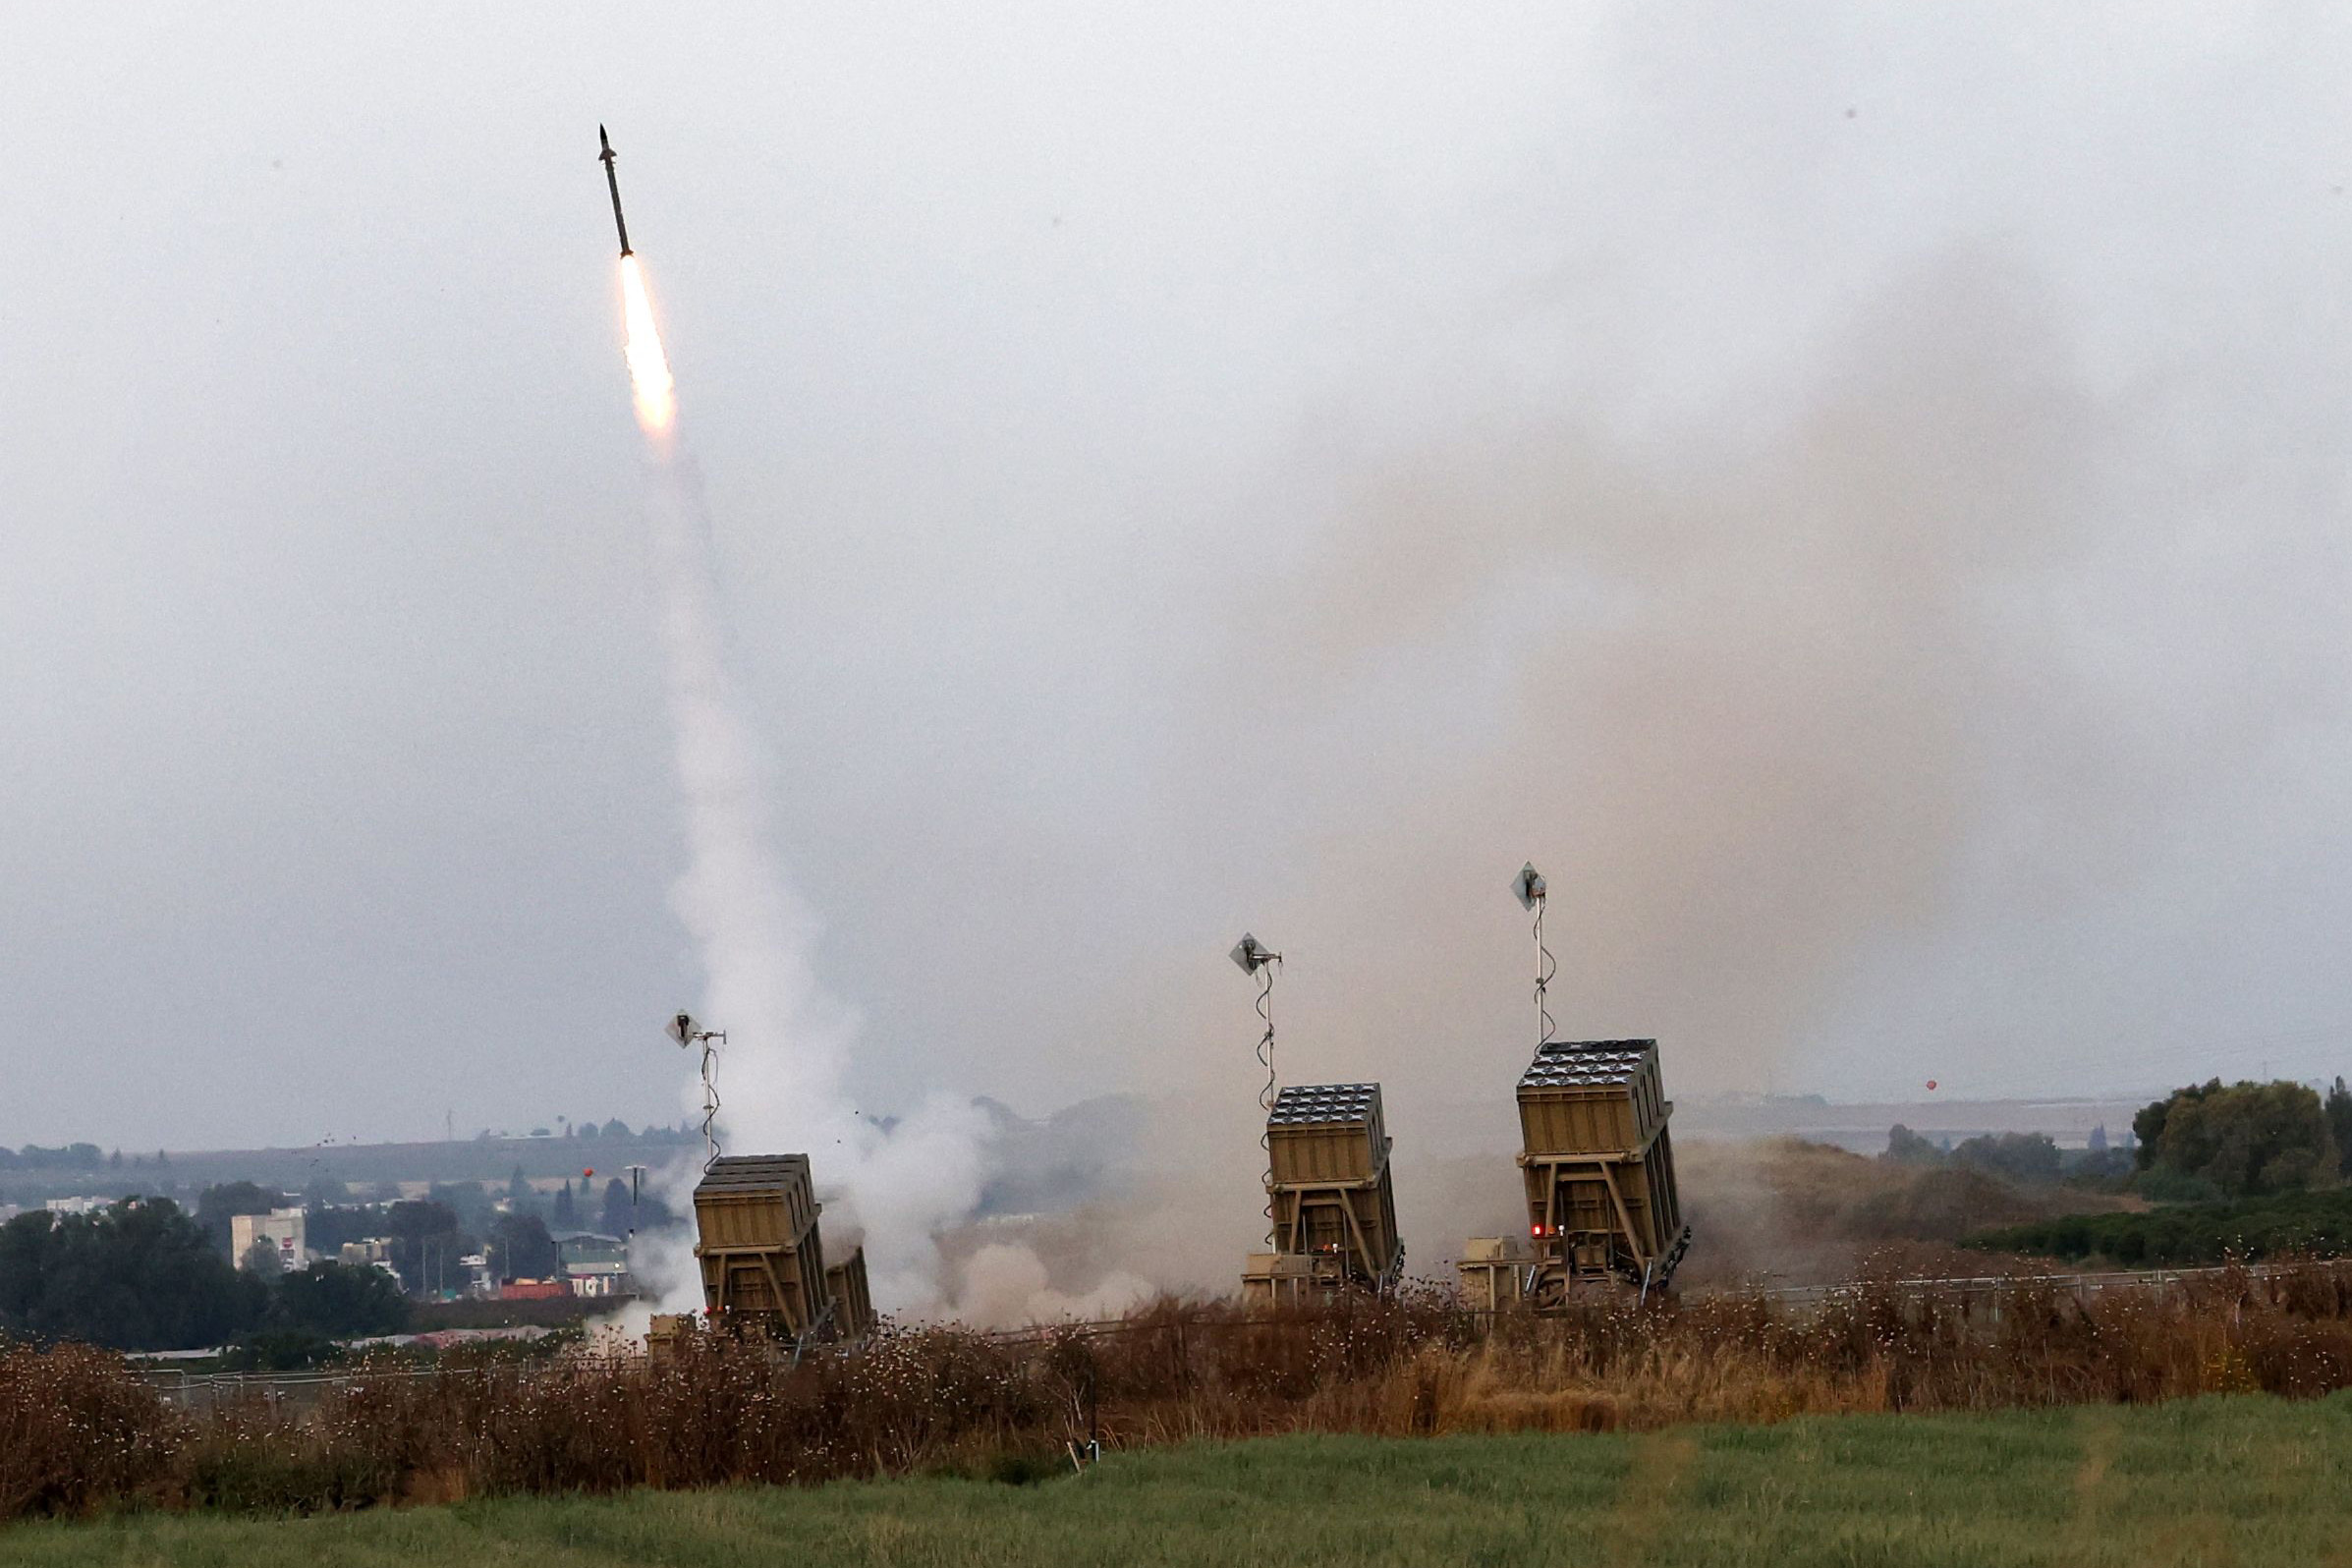 Germany, Israel sign 'historic' missile shield deal